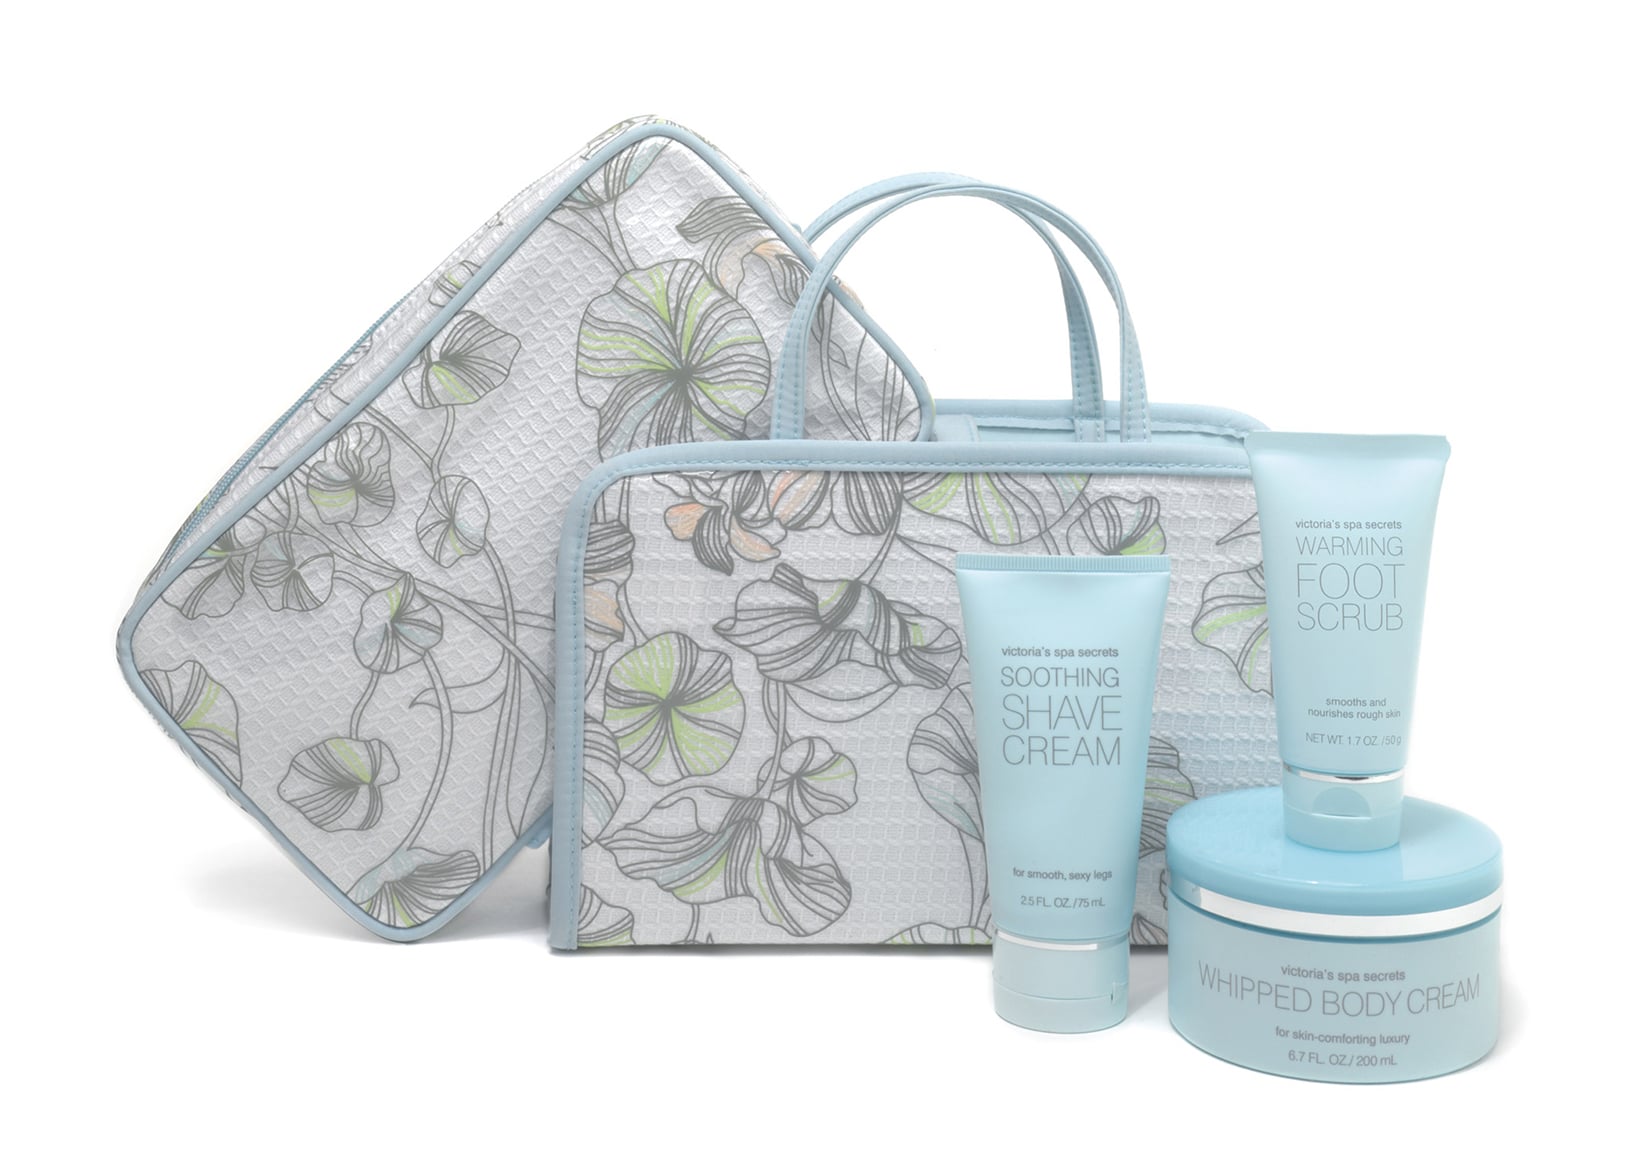 Travel gift bag design for Victoria's Secret Spa Secrets travel gift bag design showcasing light blue lotions and pouches with floral designs.